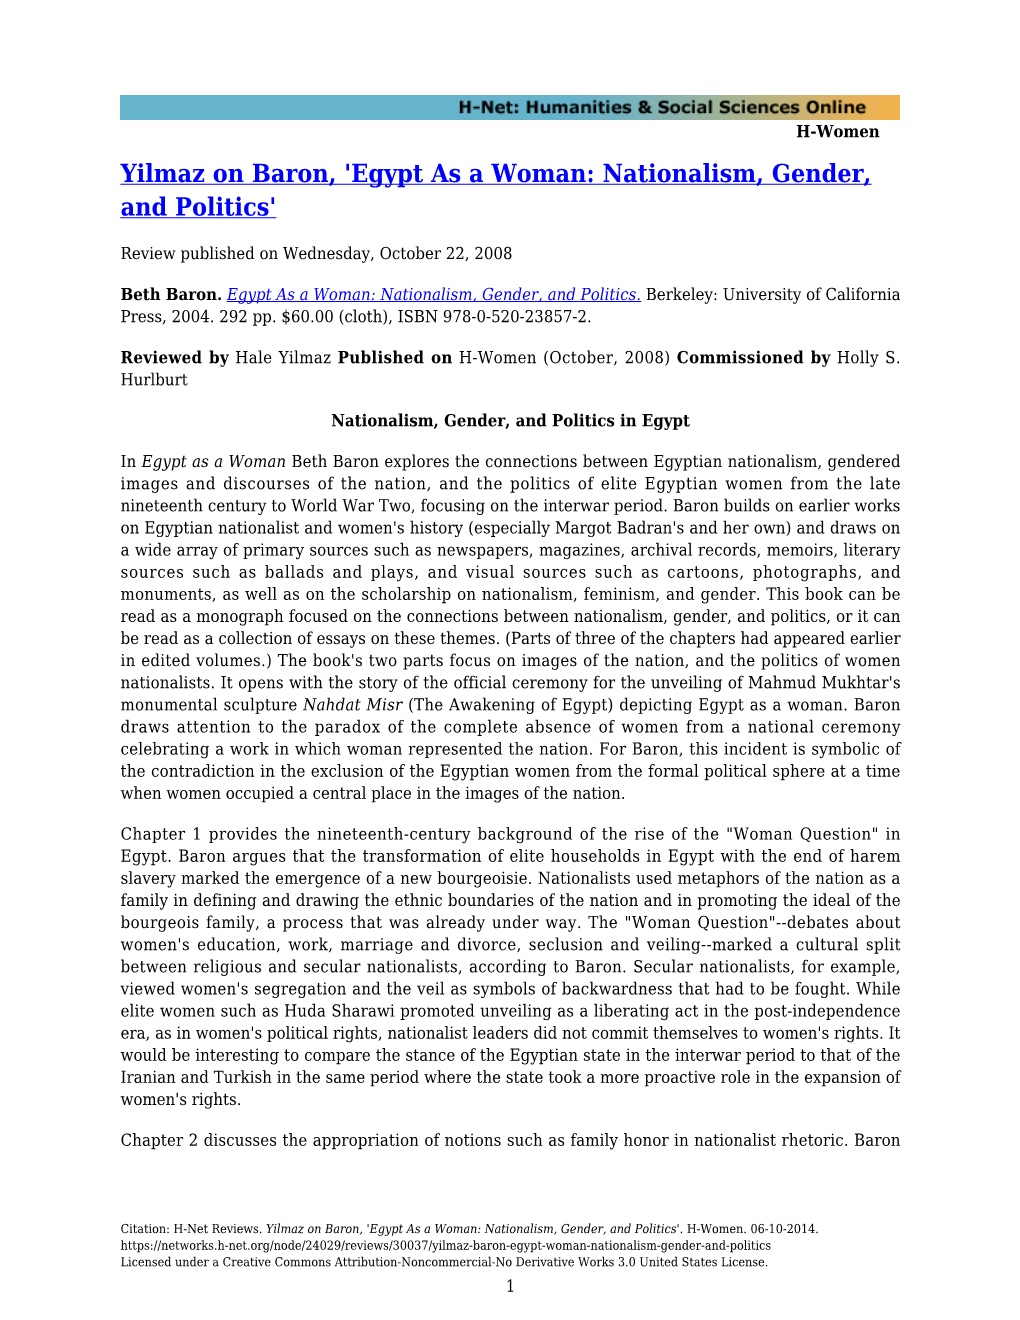 Egypt As a Woman: Nationalism, Gender, and Politics'